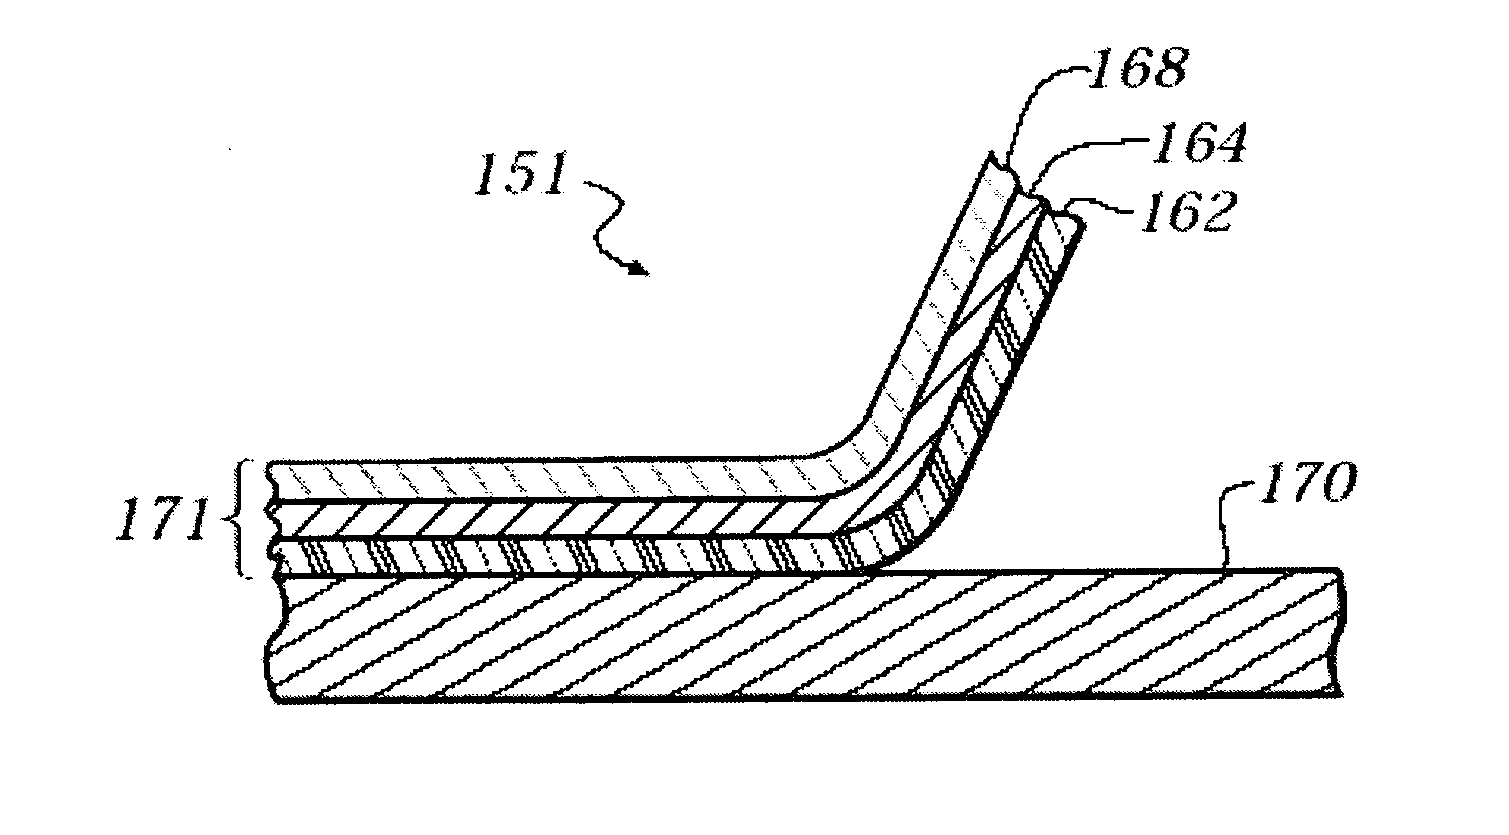 Optical film composite having spatially controlled adhesive strength